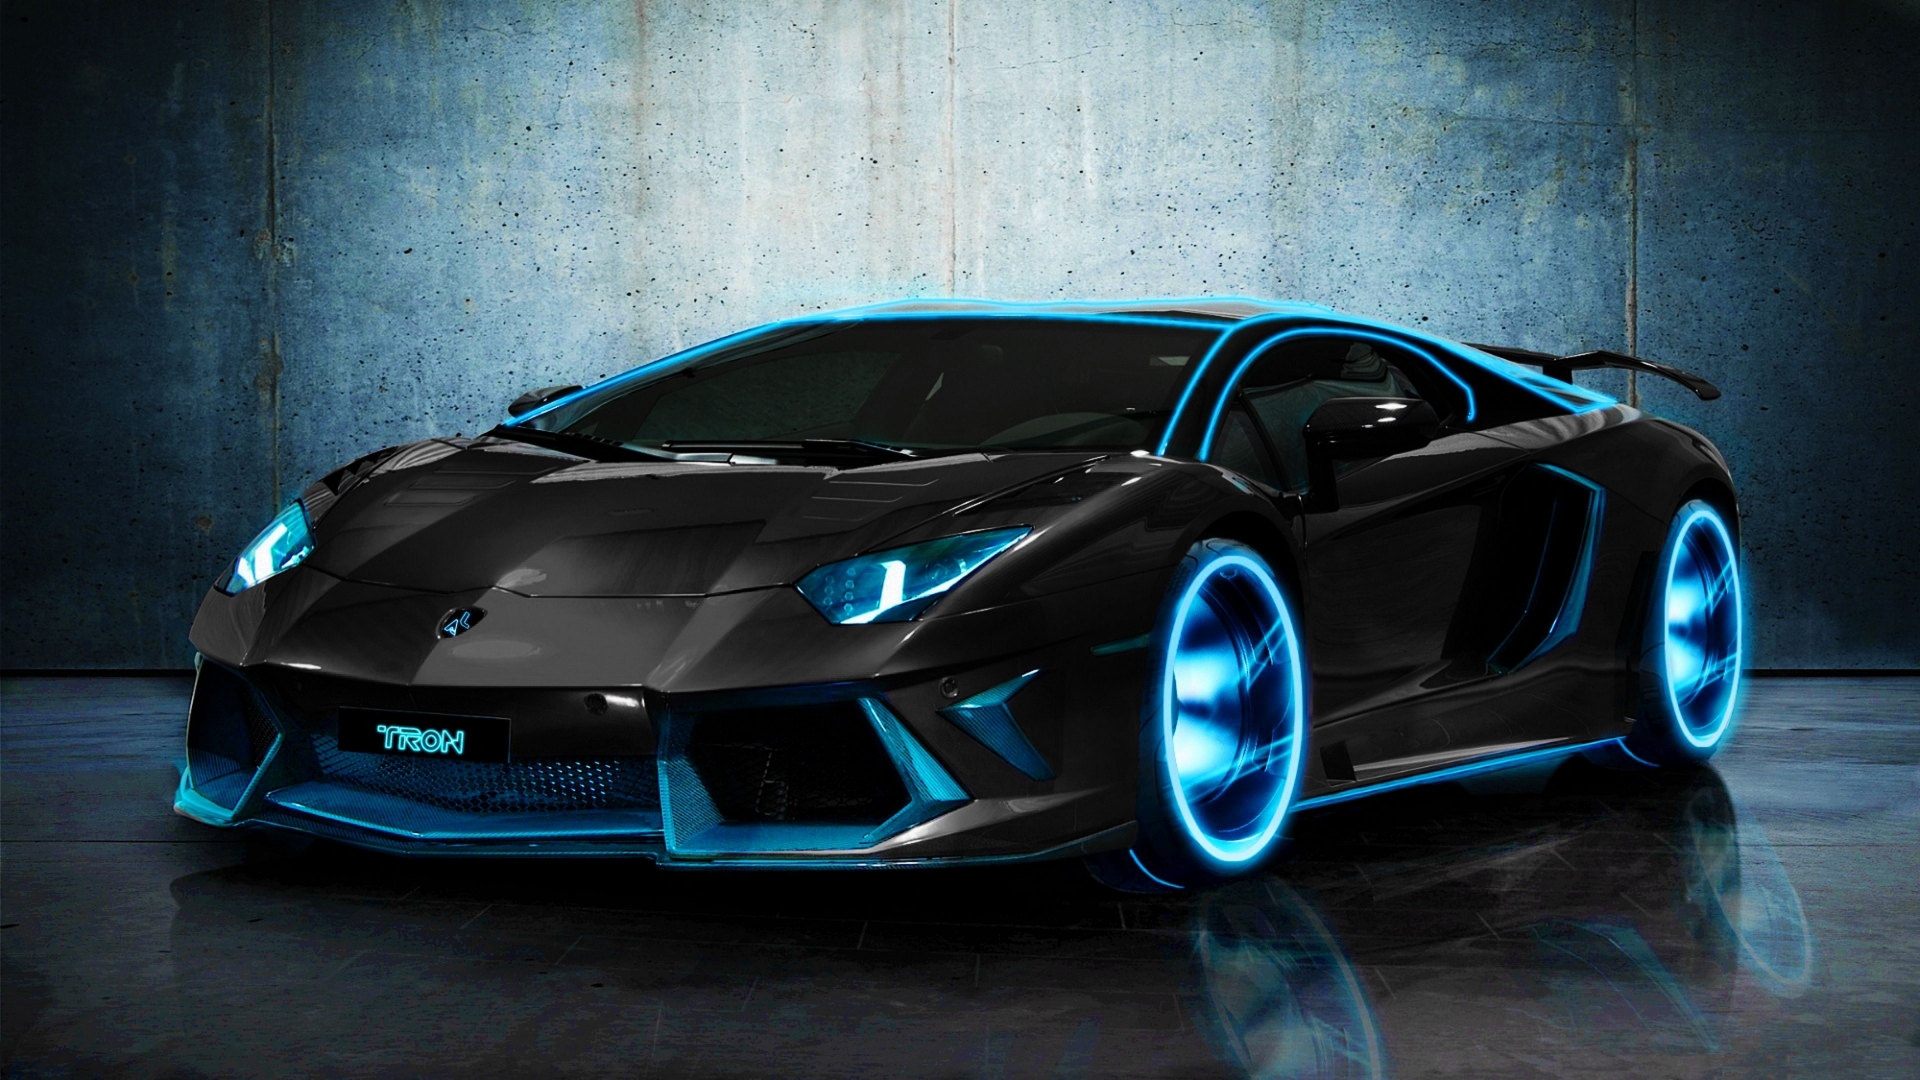 Tron Lamborghini Aventador Wallpapers HD A11 Black - lamborghini aventador desktop sports cars, race cars, luxury cars, expensive cars, wallpapers pictures images free download